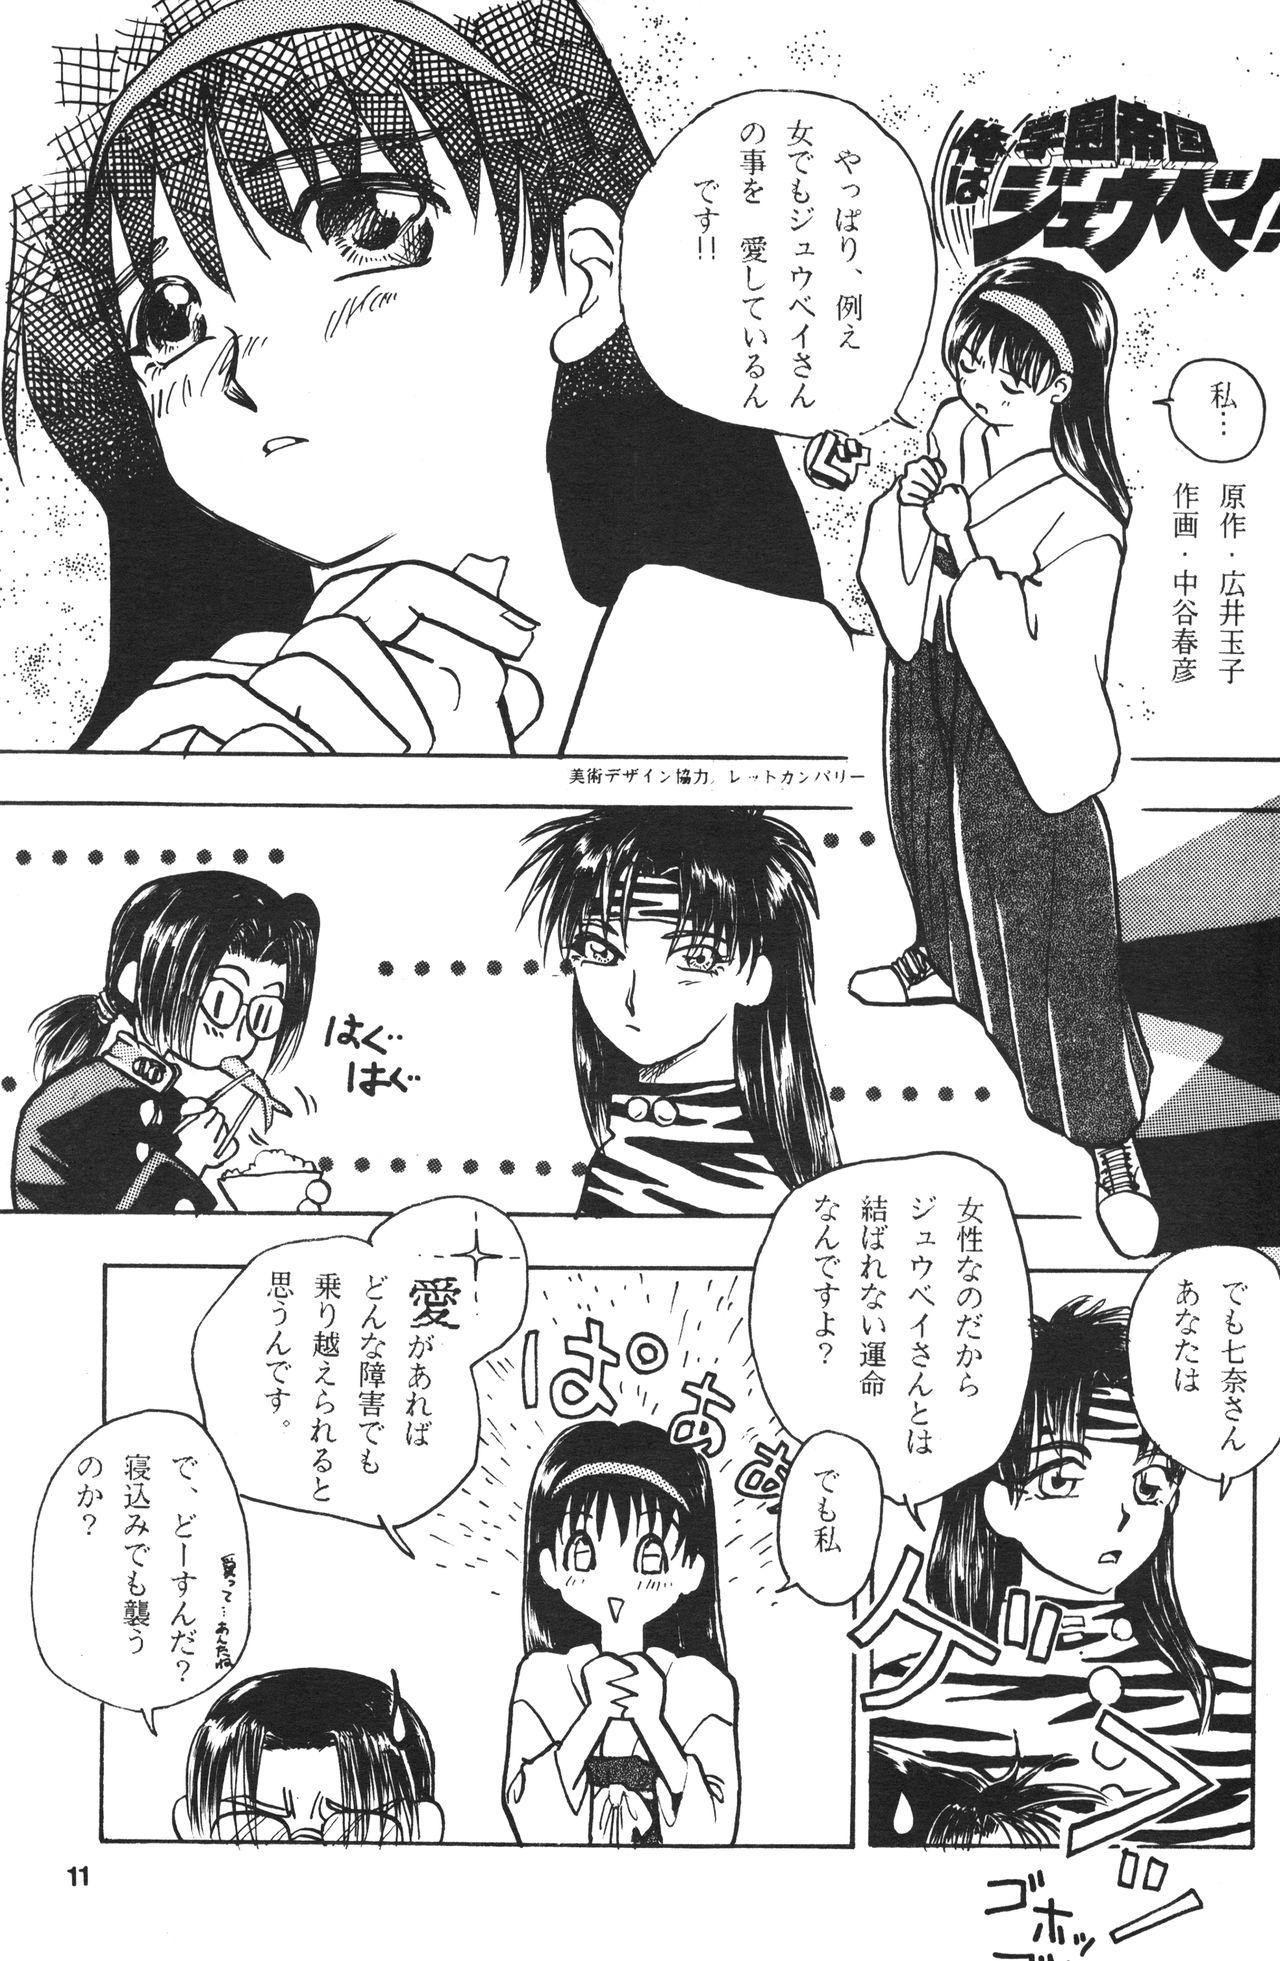 For Seinen Sunday - Street fighter Ranma 12 Ghost sweeper mikami Hairy - Page 10